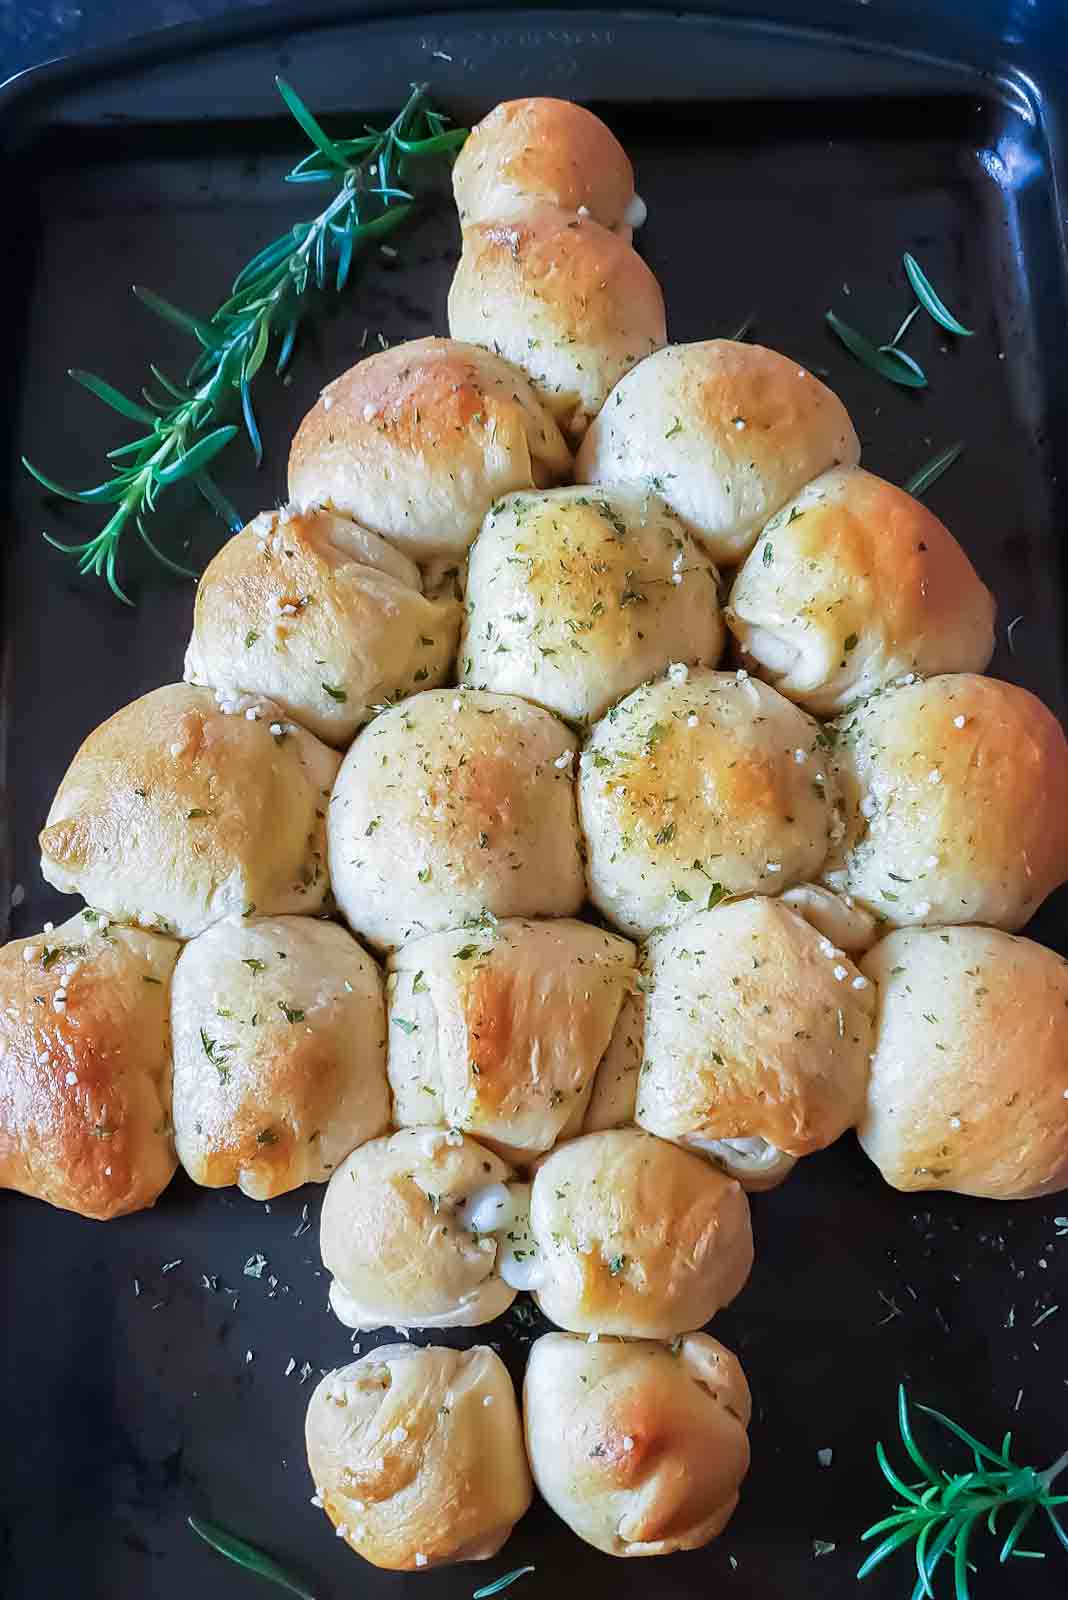 Christmas tree pull apart bread with butter and garlic garnish made with crescent rolls.